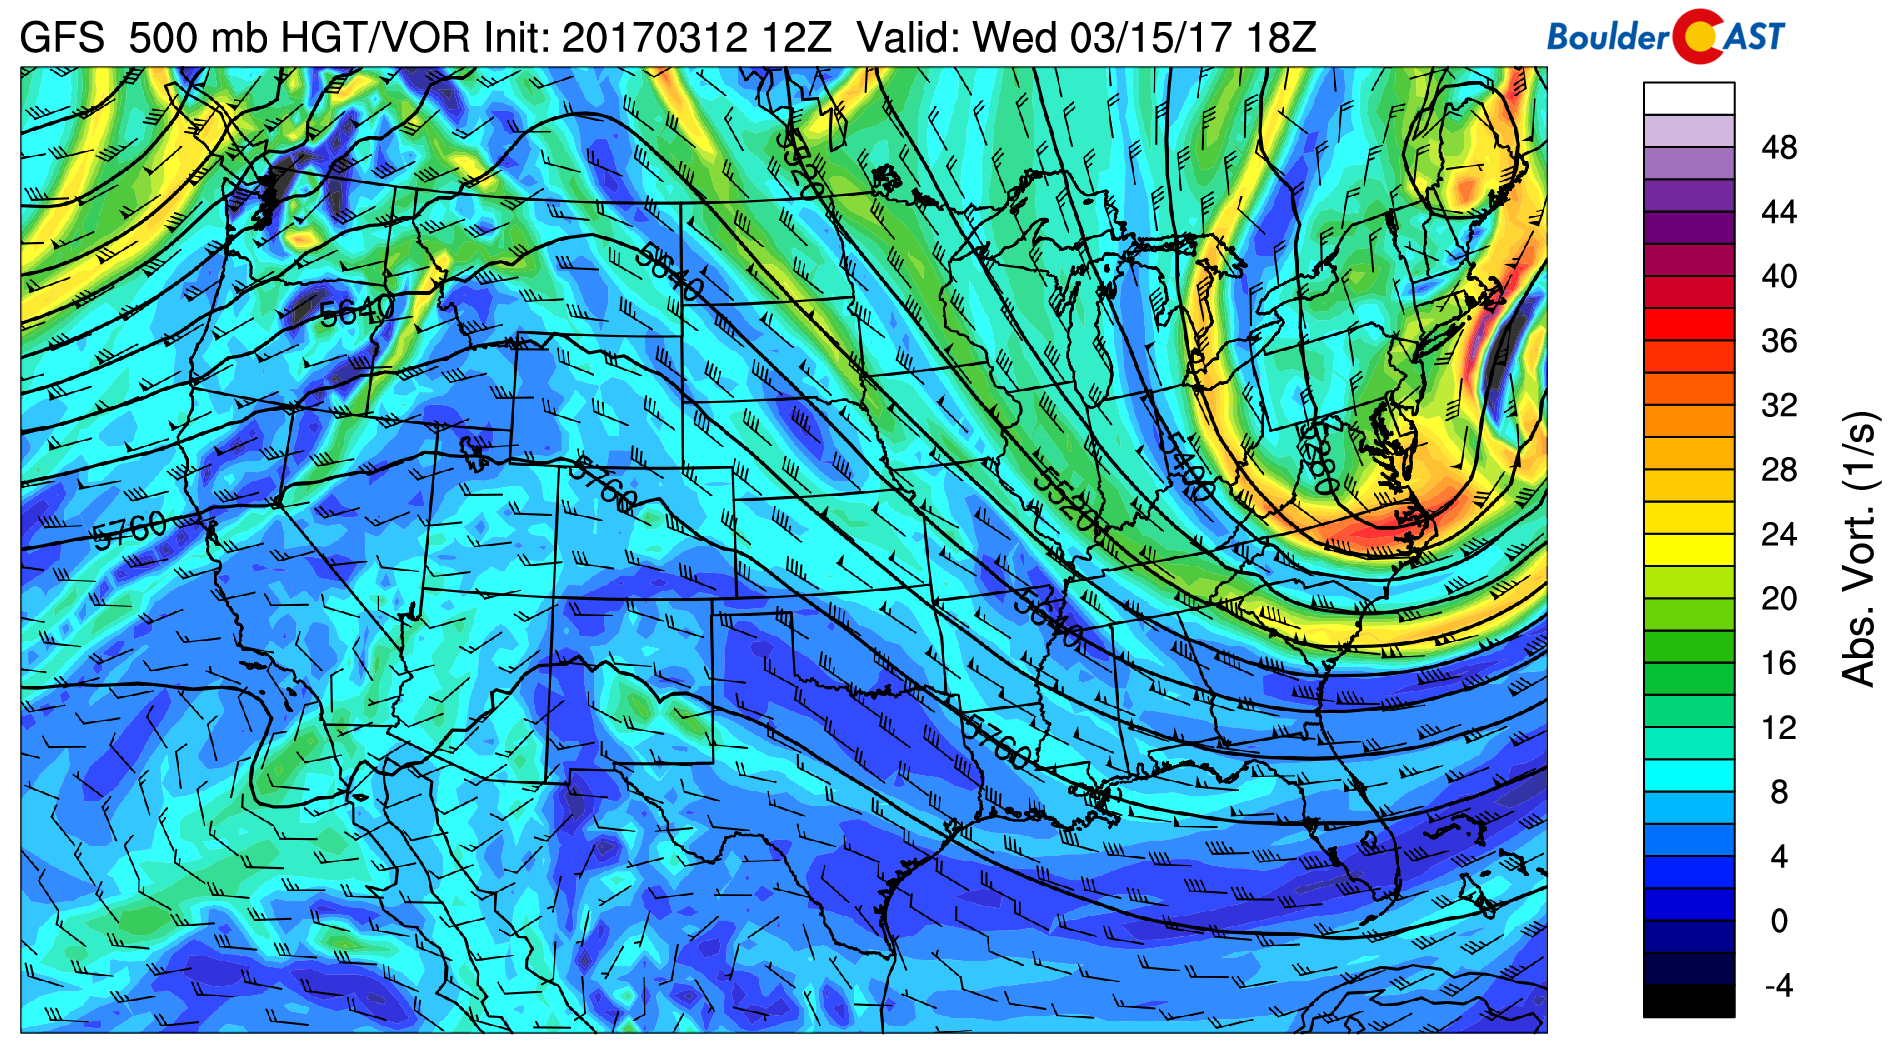 GFS 500 mb absolute vorticity map for Wednesday